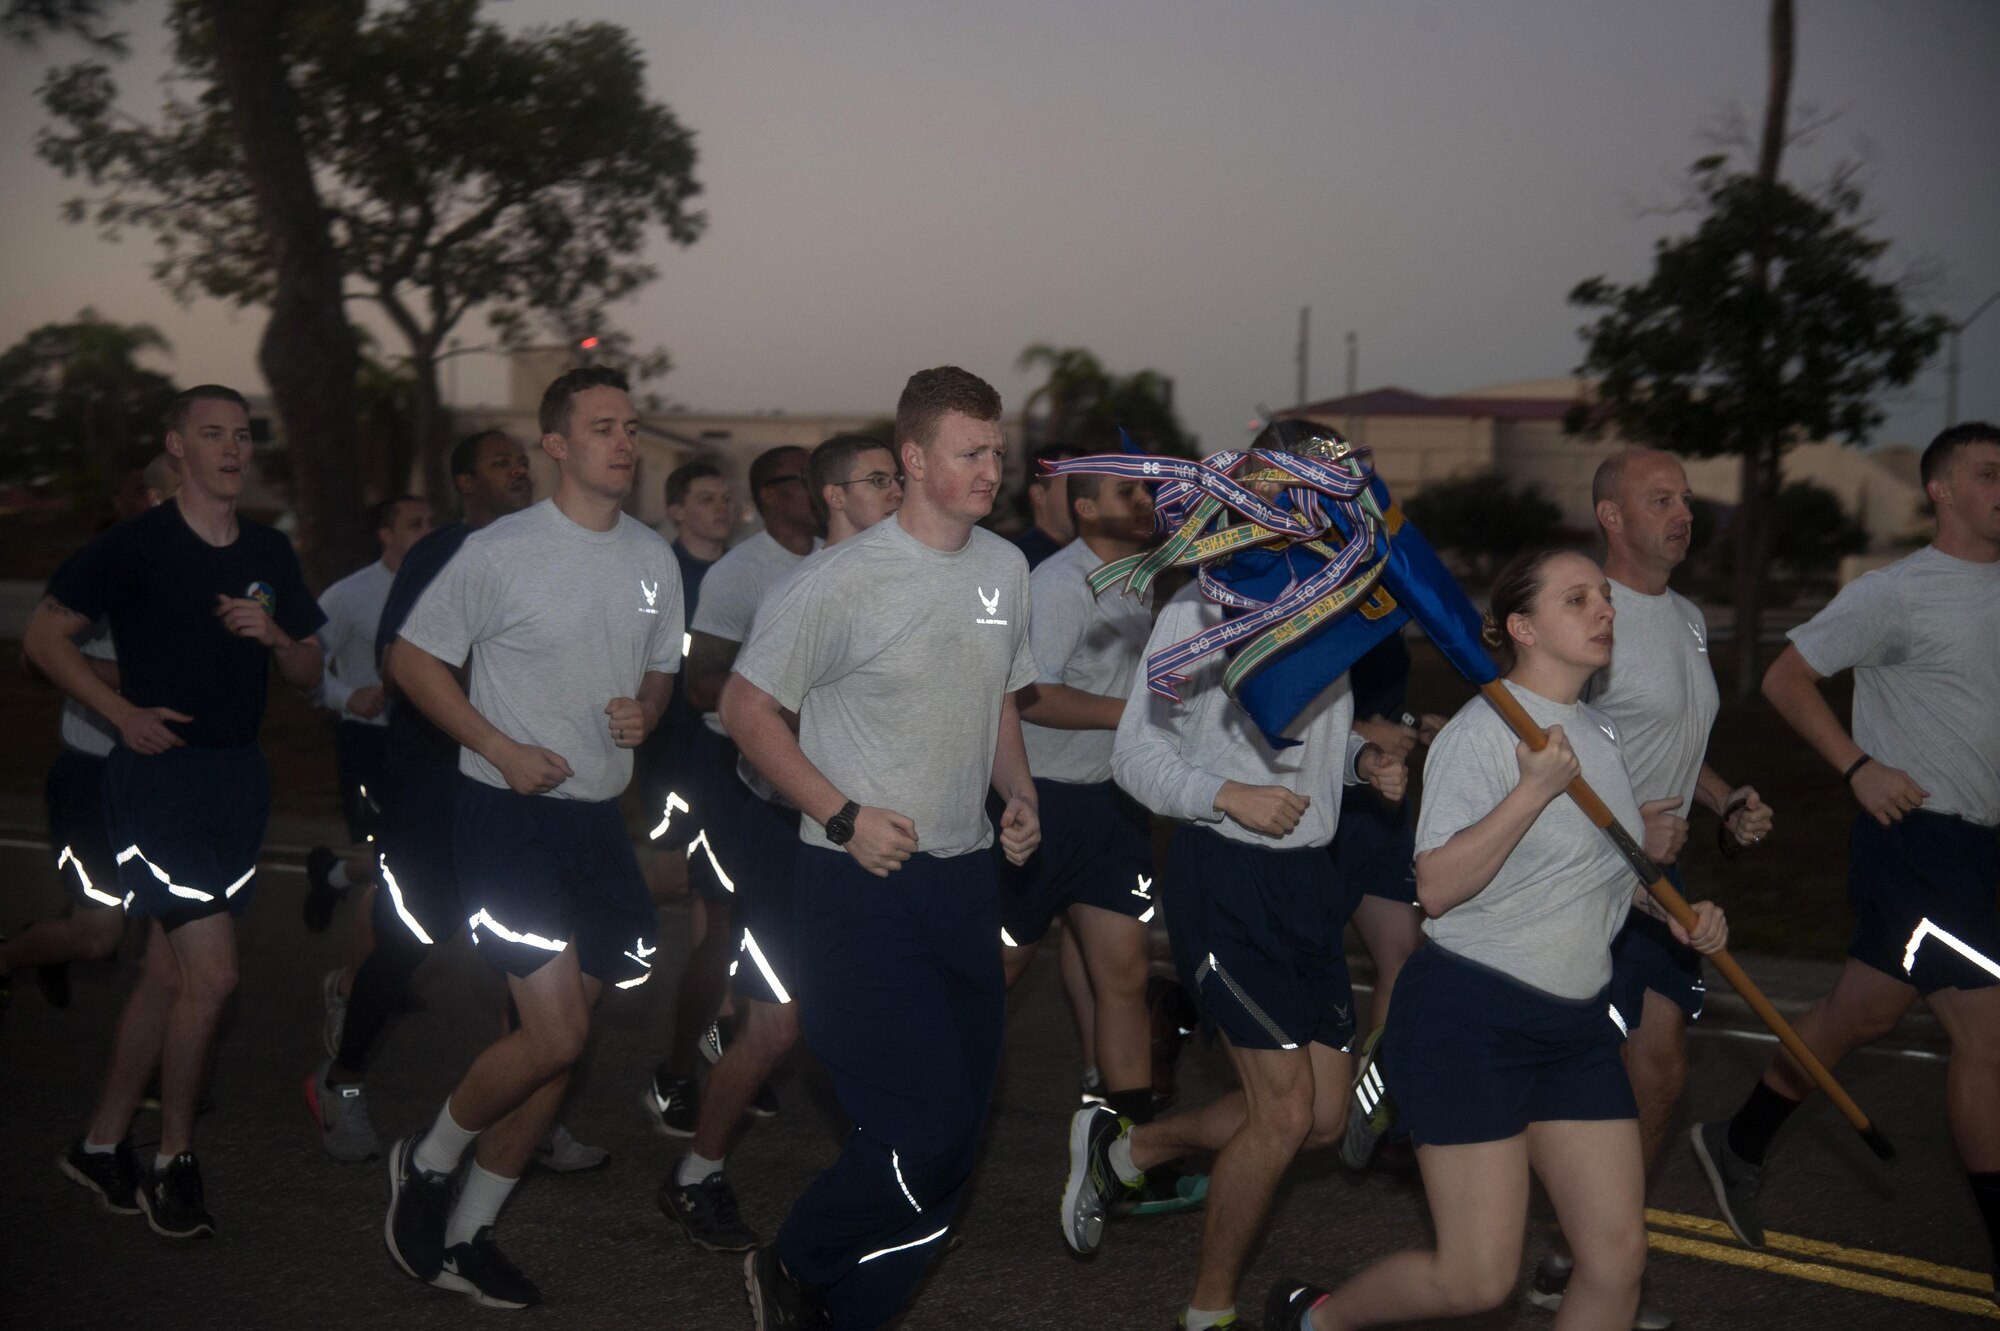 Members of Team MacDill participate in a 5k formation run as part of an event to honor Maj. Raymond Estelle at MacDill Air Force Base, Fla., Jan. 13, 2017. The event started with a 5k formation run around MacDill before the weight lifting competition. (U.S. Air Force photo by Airman 1st Class Rito Smith) 
